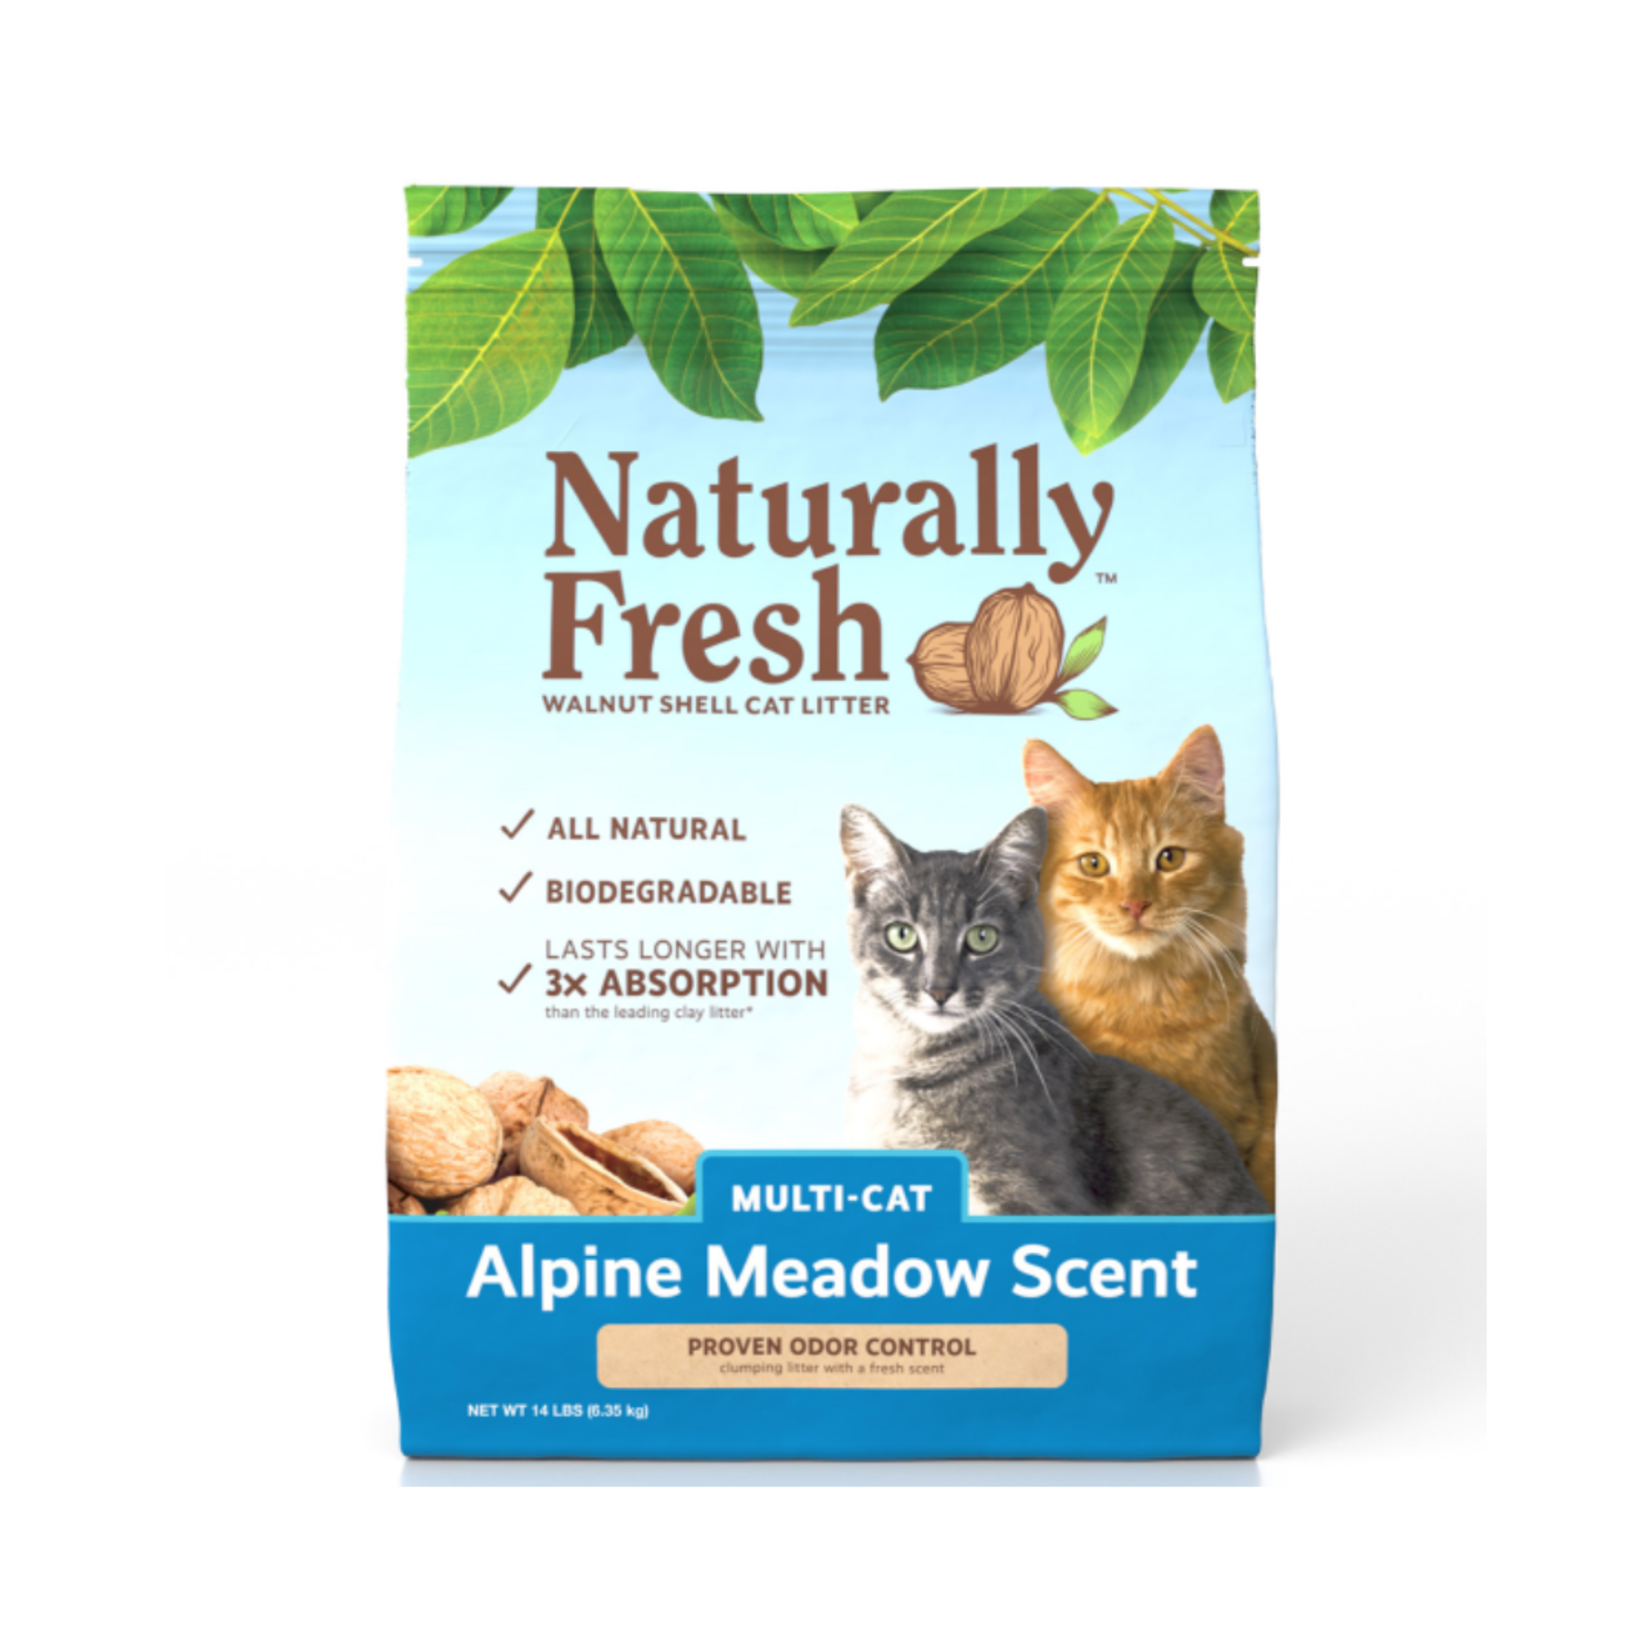 Naturally Fresh Naturally Fresh Alpine Meadow Scent Multi-Cat Quick-Clumping Cat Litter 14lb